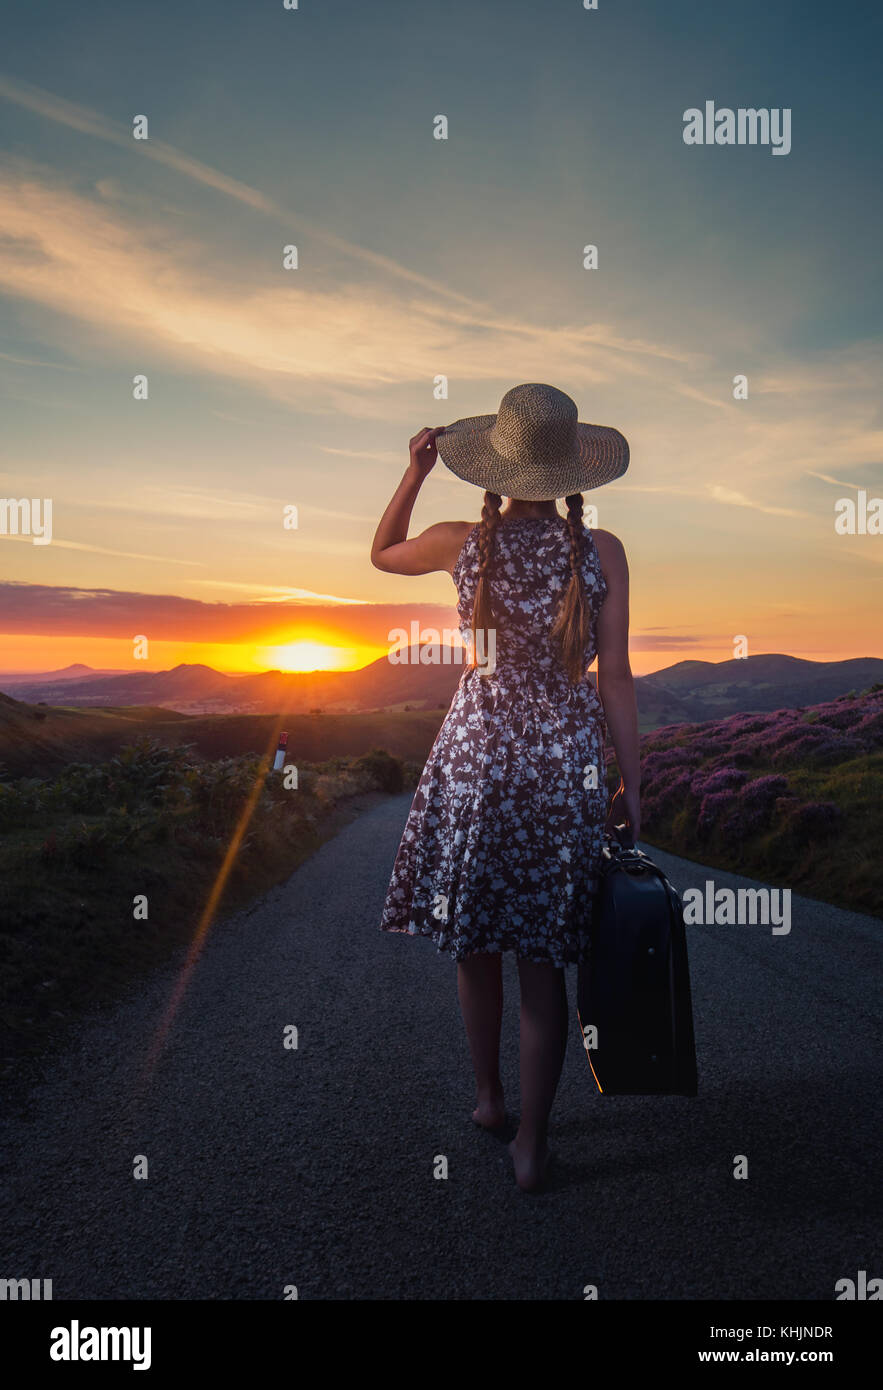 Girl with a Suitcase Looking at Beautiful Sunrise Walking on Asphalt Road in Mountains Stock Photo